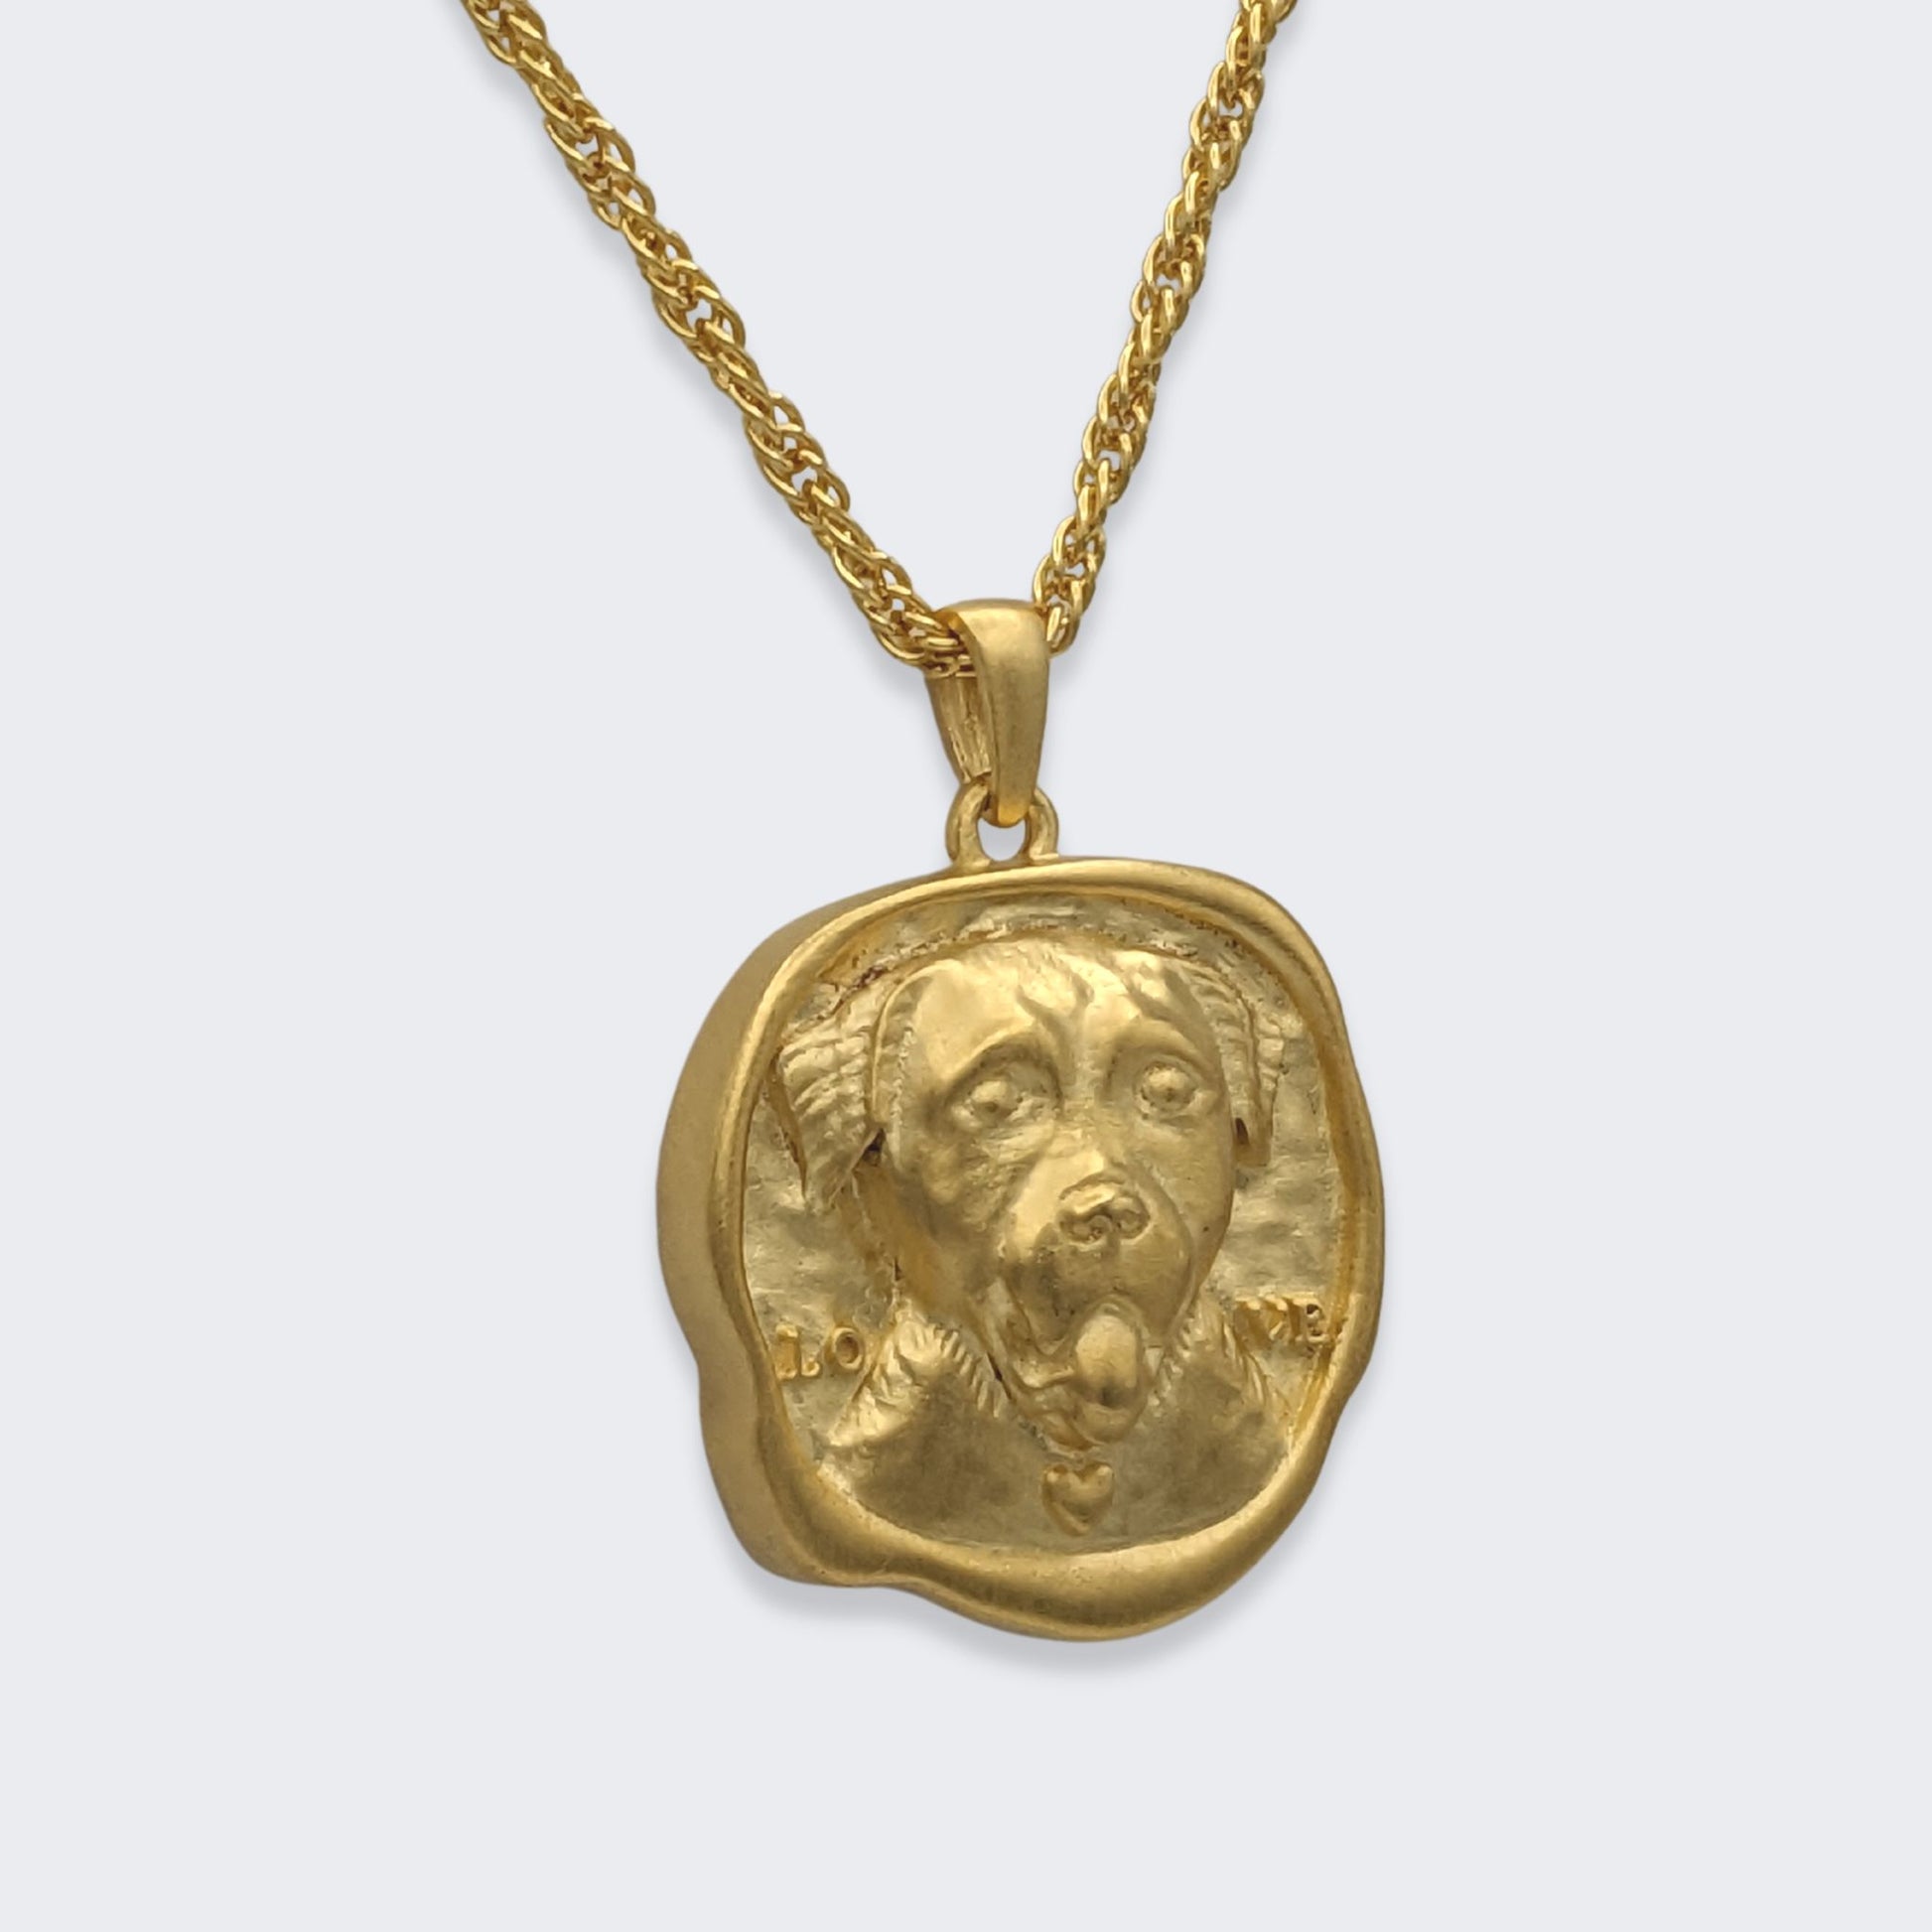 lars reversible dog coin necklace in 18k gold vermeil (right side view)